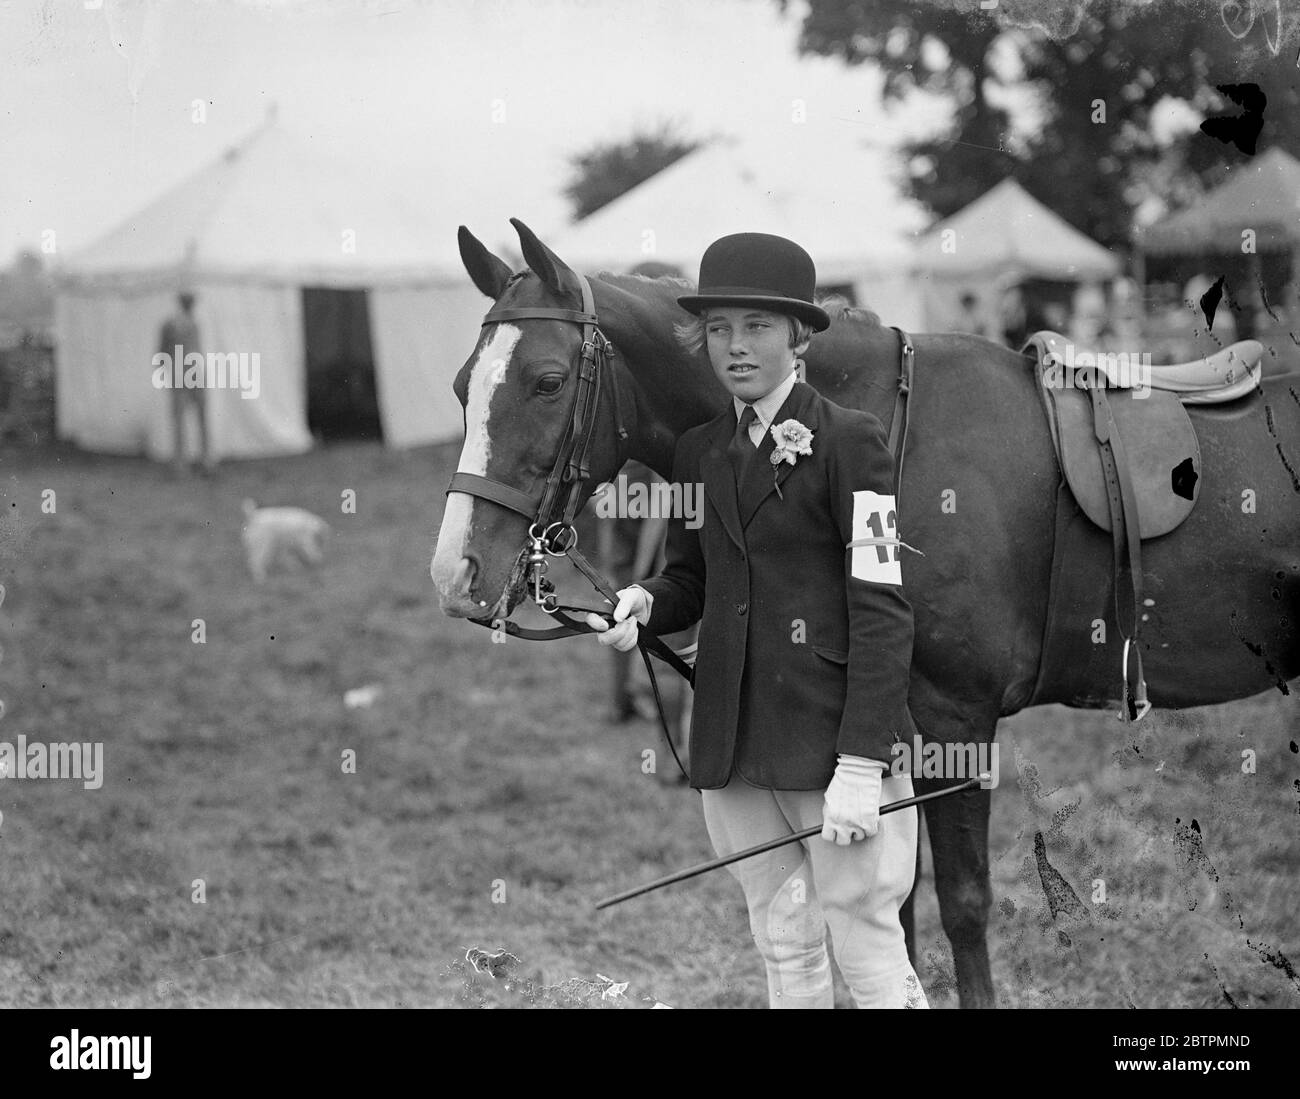 Star of the show . The Bicester Agricultural Show took place at Bicester , Oxfordshire . Photo shows , Miss Molly Ryder Richardson with ' Royal Star ' , the Hon Noreen Stonor ' s pony . 1 September 1936 . Original caption from negative Stock Photo